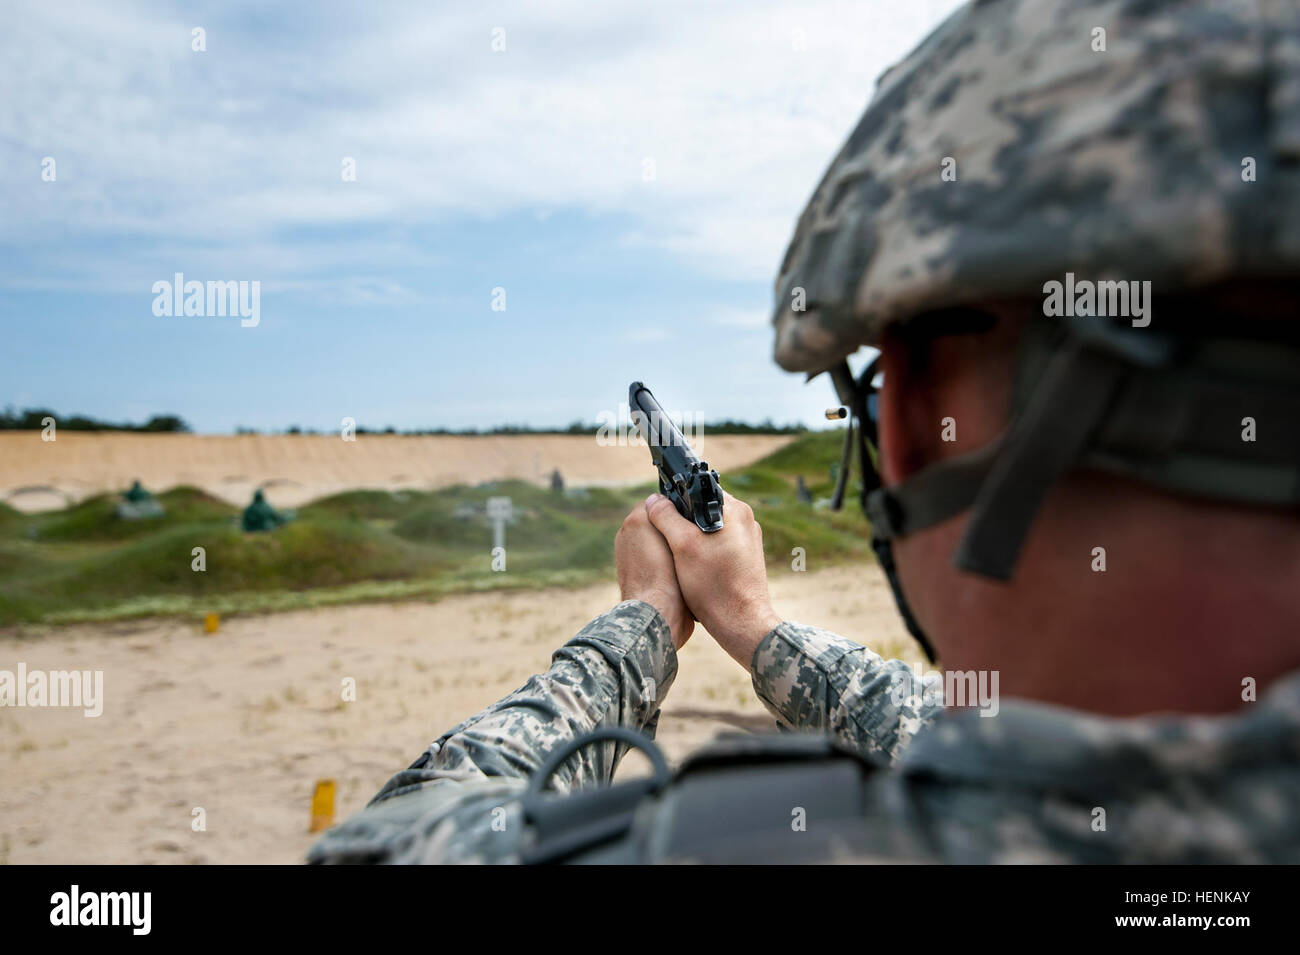 Spc. Brandyn Sprague, with the 505th Theater Tactical Signal Brigade headquartered in Las Vegas, fires a 9mm pistol at the qualification range at Joint Base McGuire-Dix-Lakehurst, New Jersey, during the 2014 Army Reserve Best Warrior Competition. (U.S. Army photo by Sgt. 1st Class Michel Sauret) Soldiers fire rounds into pop-up targets during the 2014 Army Reserve Best Warrior Competition 140623-A-TI382-070 Stock Photo